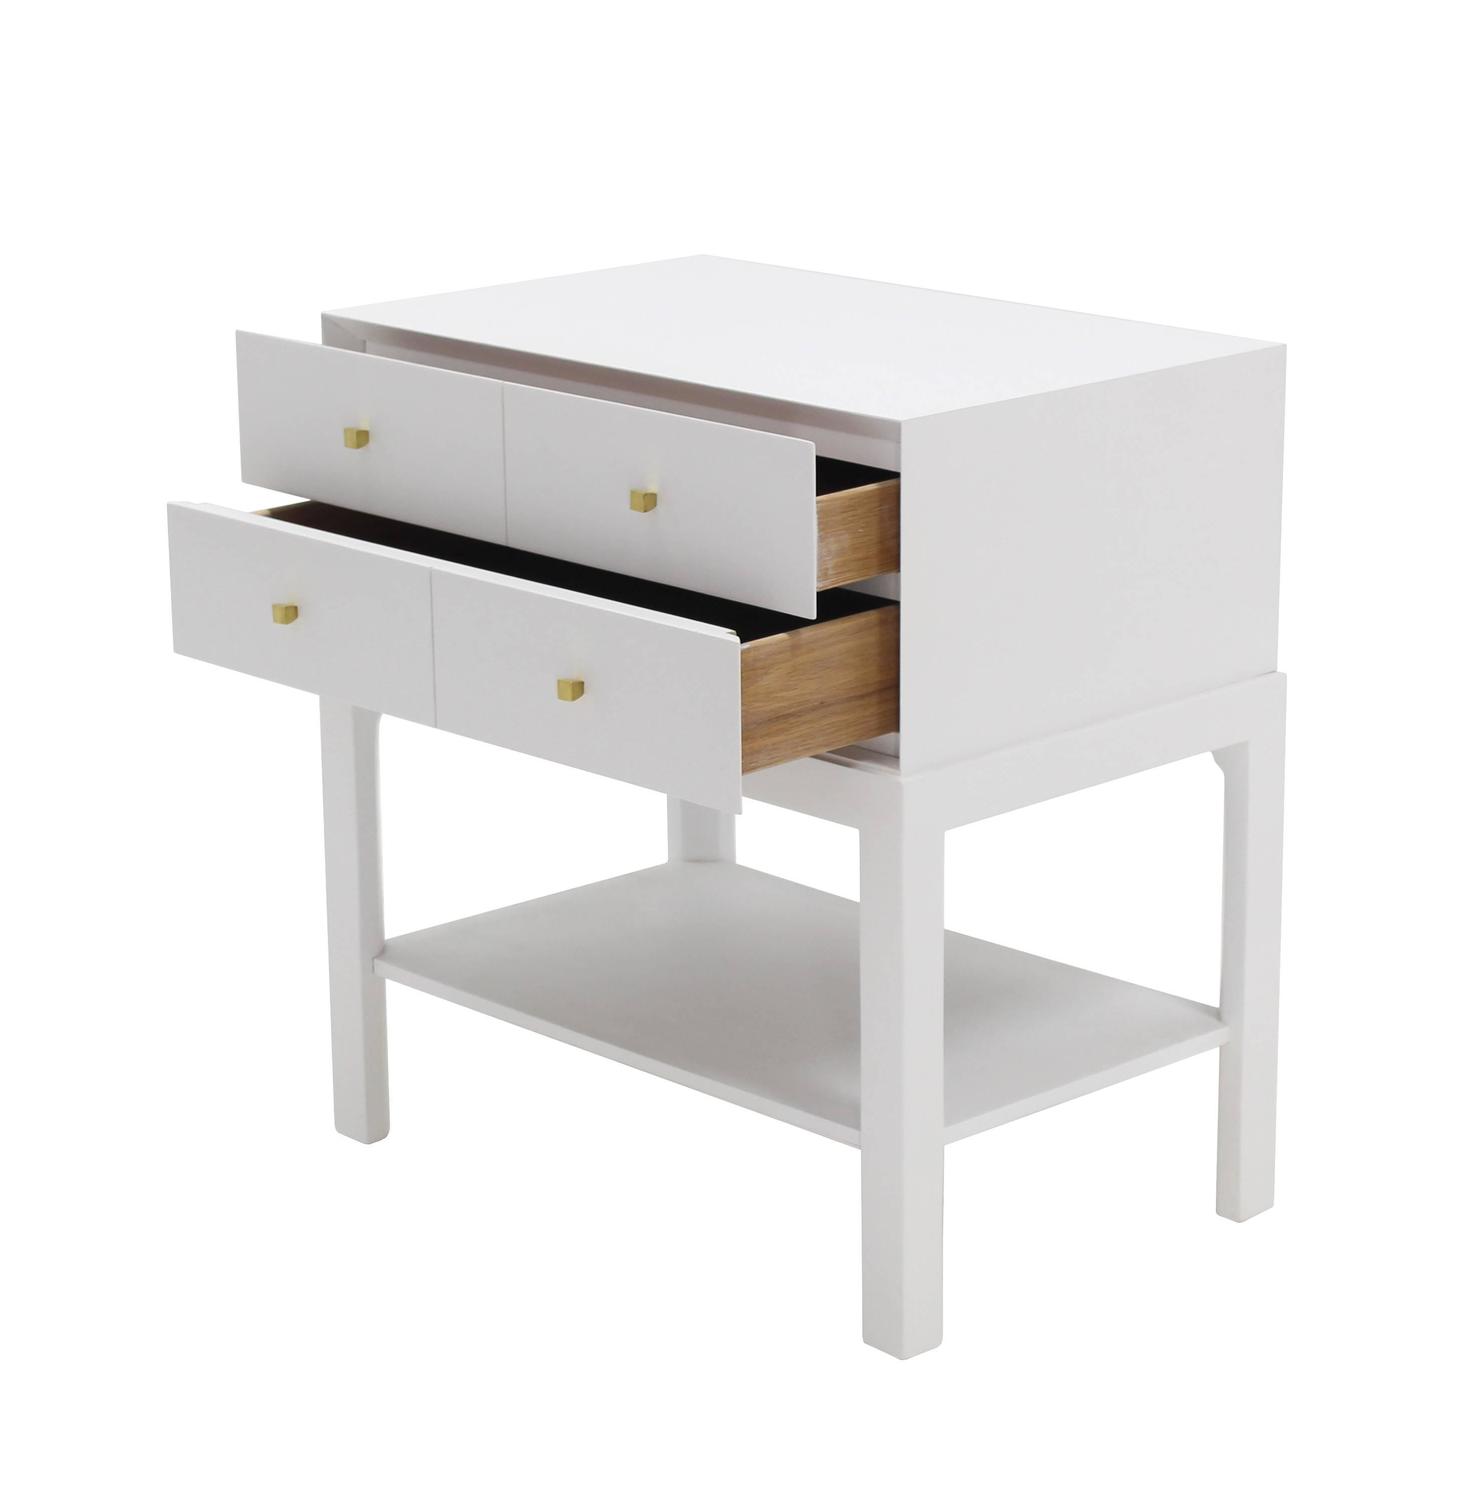 White Lacquer Diamond Shape Brass Pulls TwoDrawer Nightstand For Sale at 1stdibs